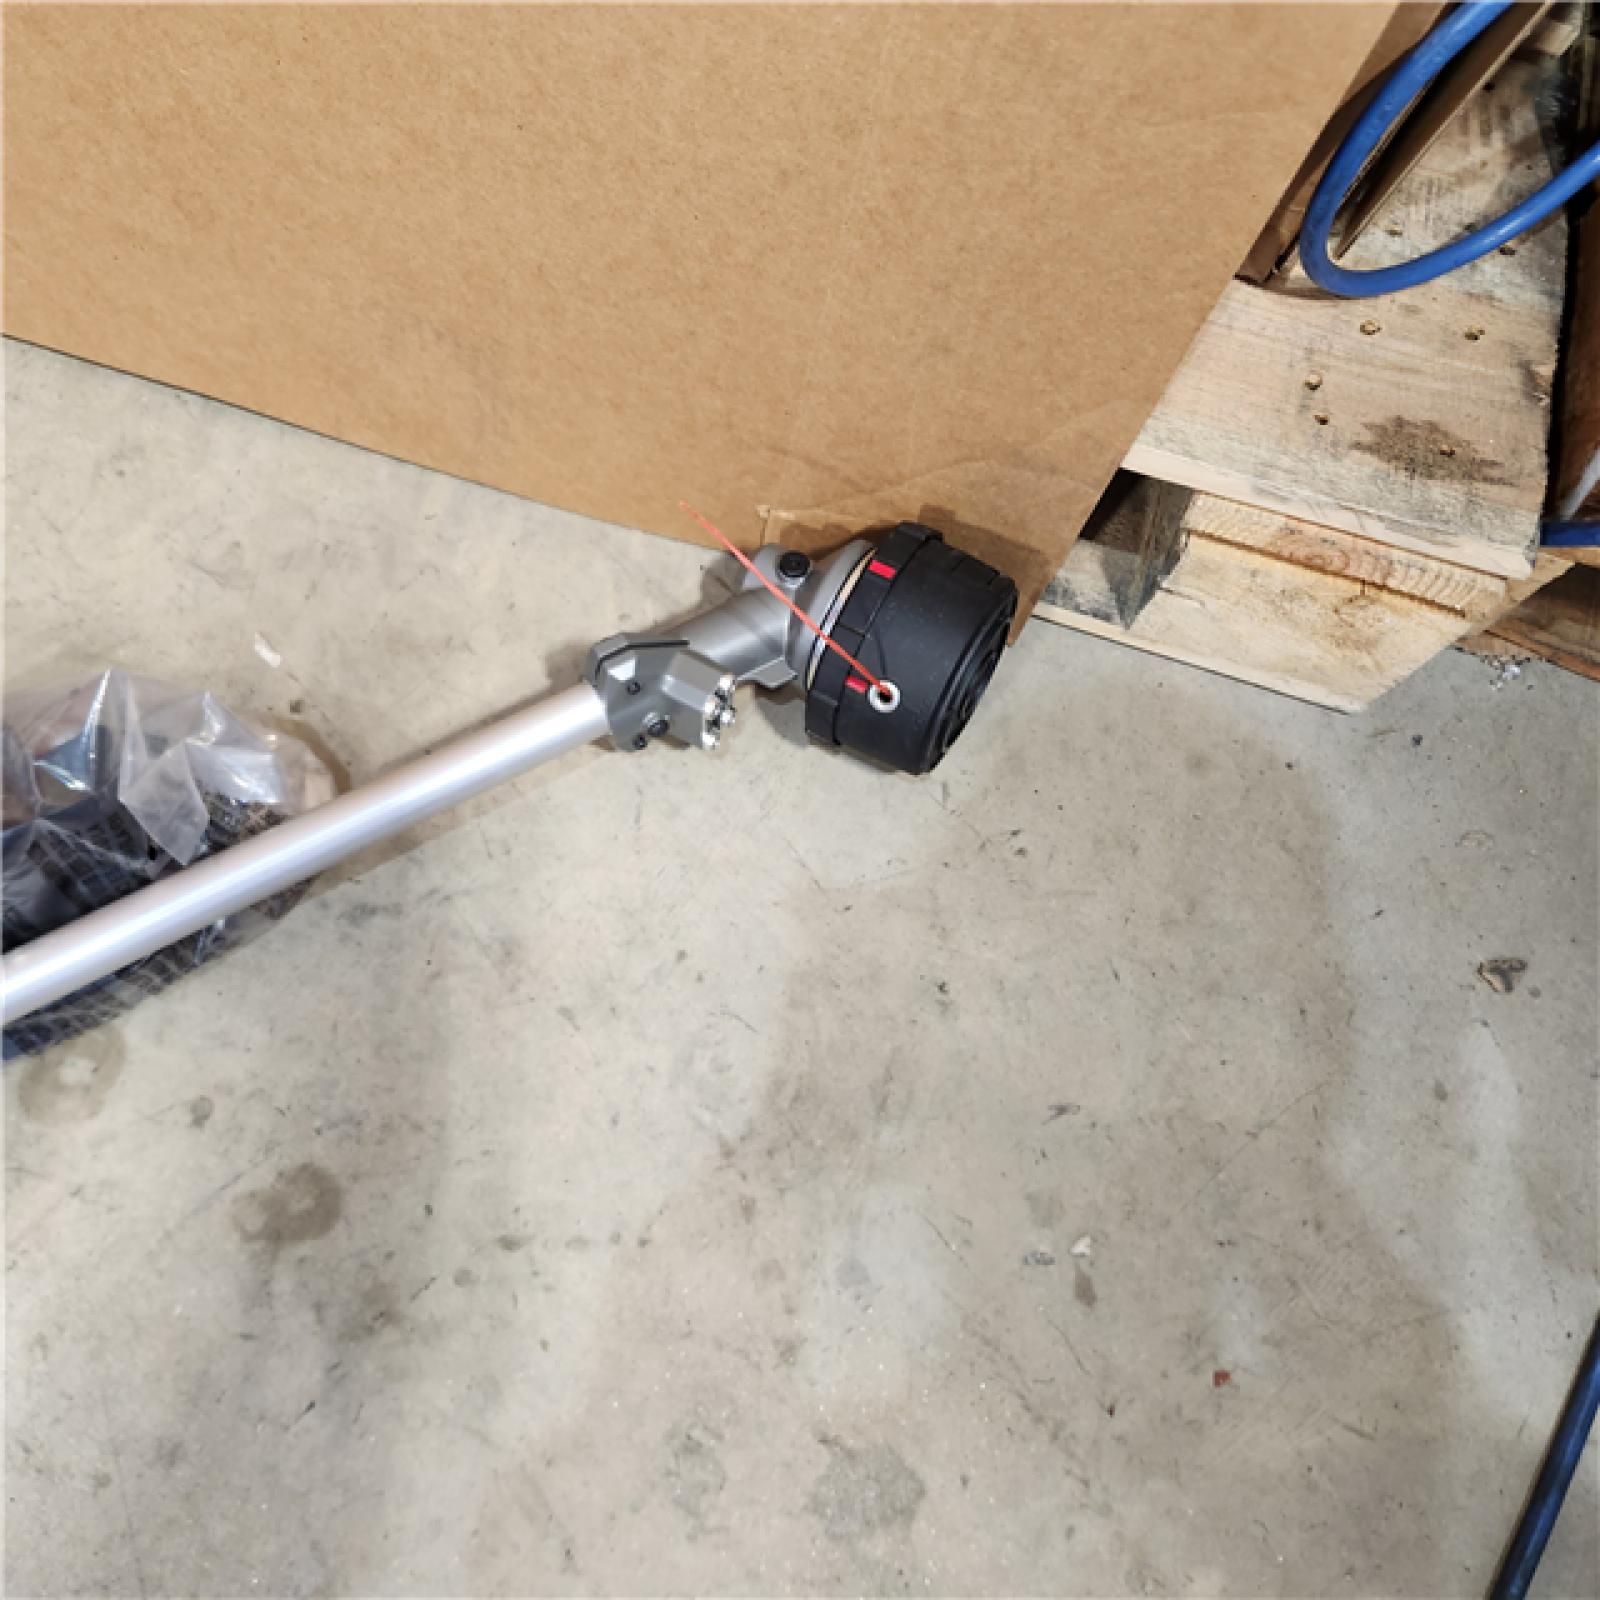 Houston Location - AS-IS Milwaukee M18 FUEL 18V Brushless Cordless 17 in. Dual Battery Straight Shaft String Trimmer (Tool-Only) - Appears IN LIKE NEW Condition